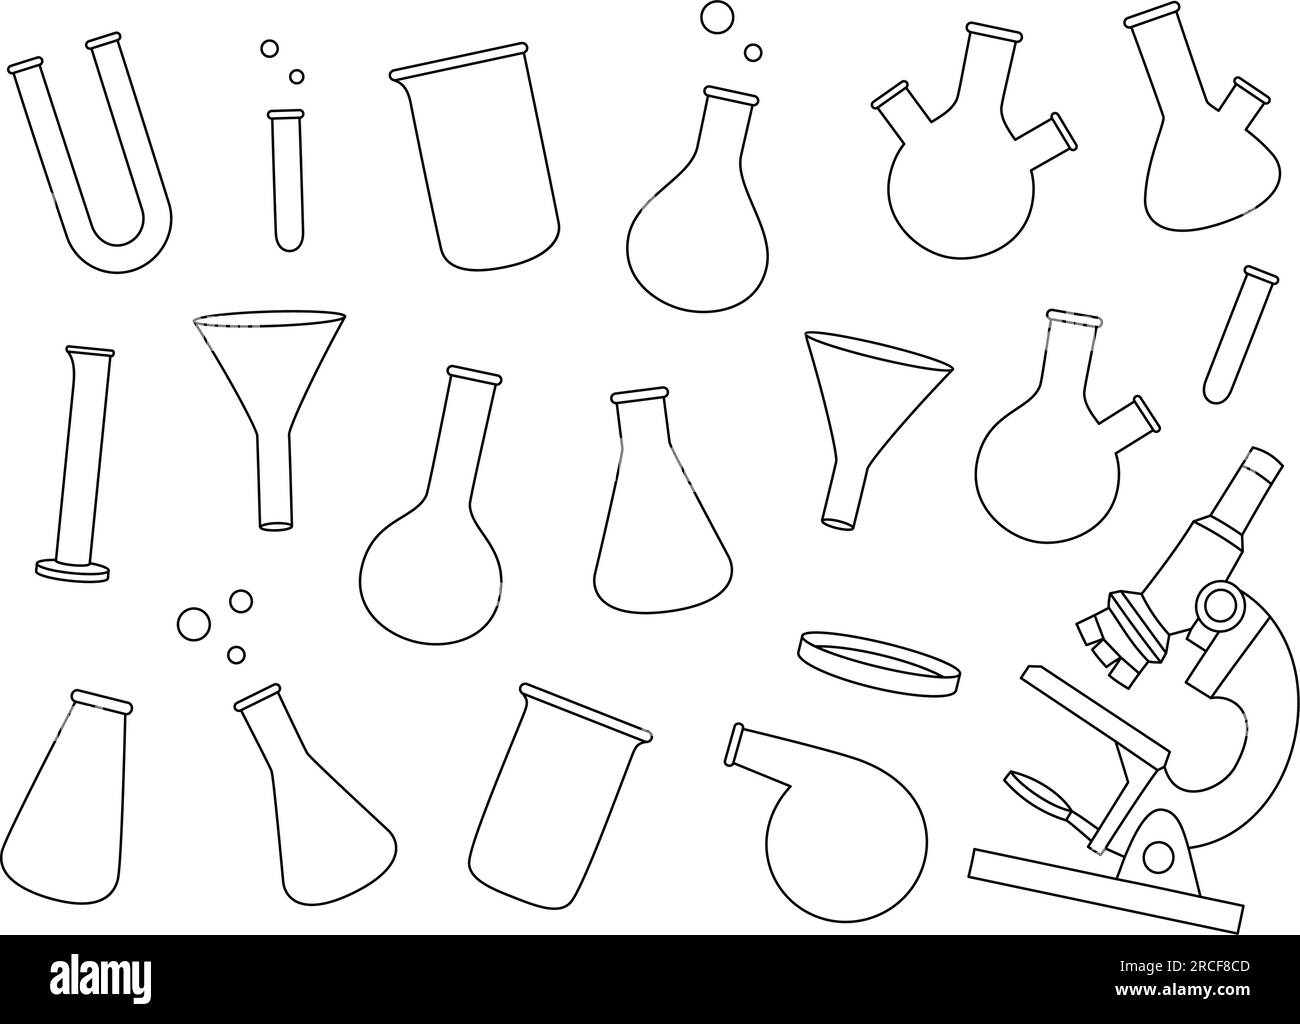 Laboratory glassware outline set. Laboratory glasses for chemistry experiments. Conical flask, glass beaker, filter funnel, U tube, microscope. Stock Vector